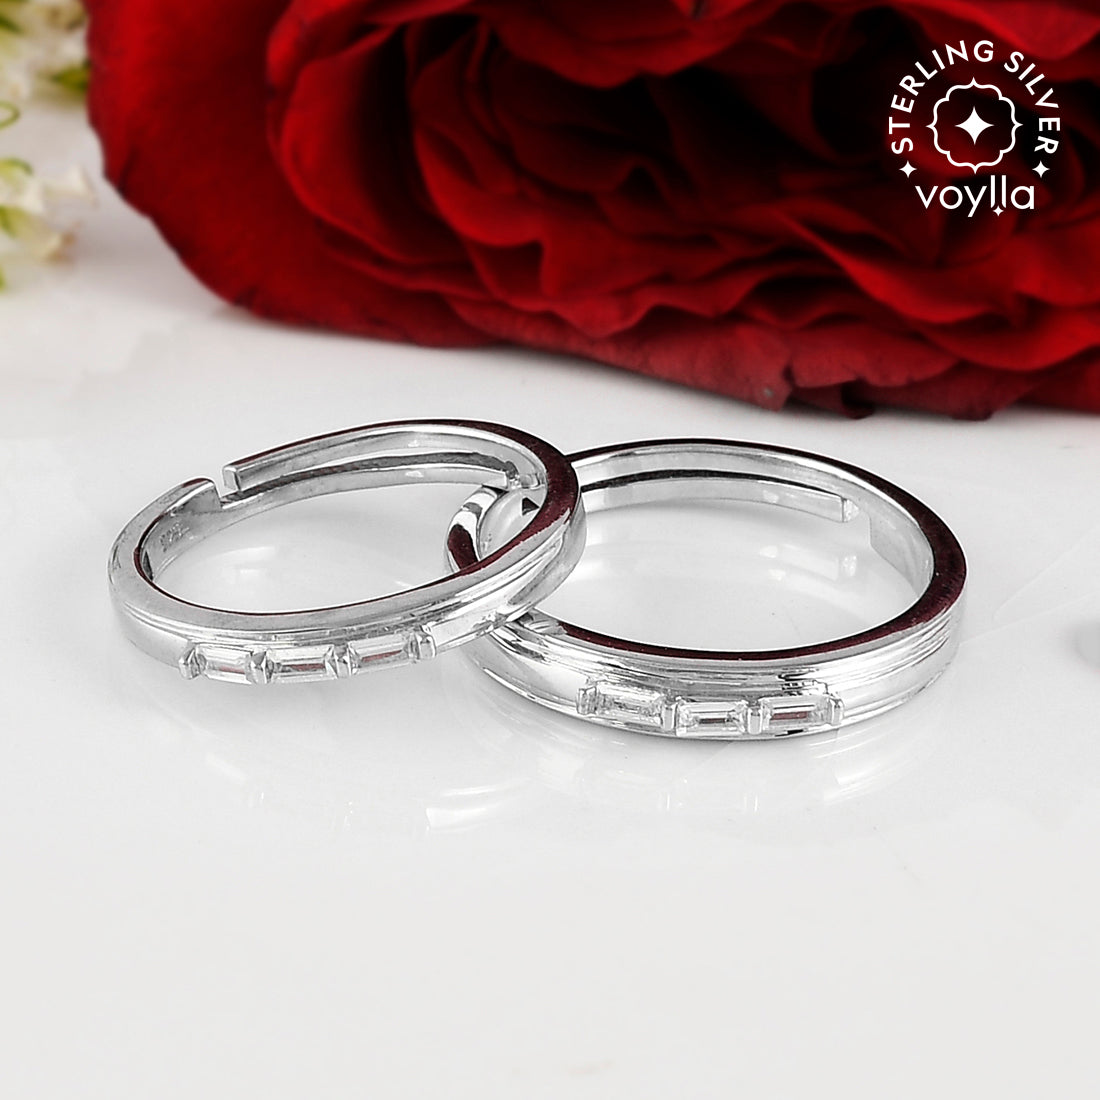 Purchase the High-Quality Men's 925 Silver Wedding Rings | GLAMIRA.com